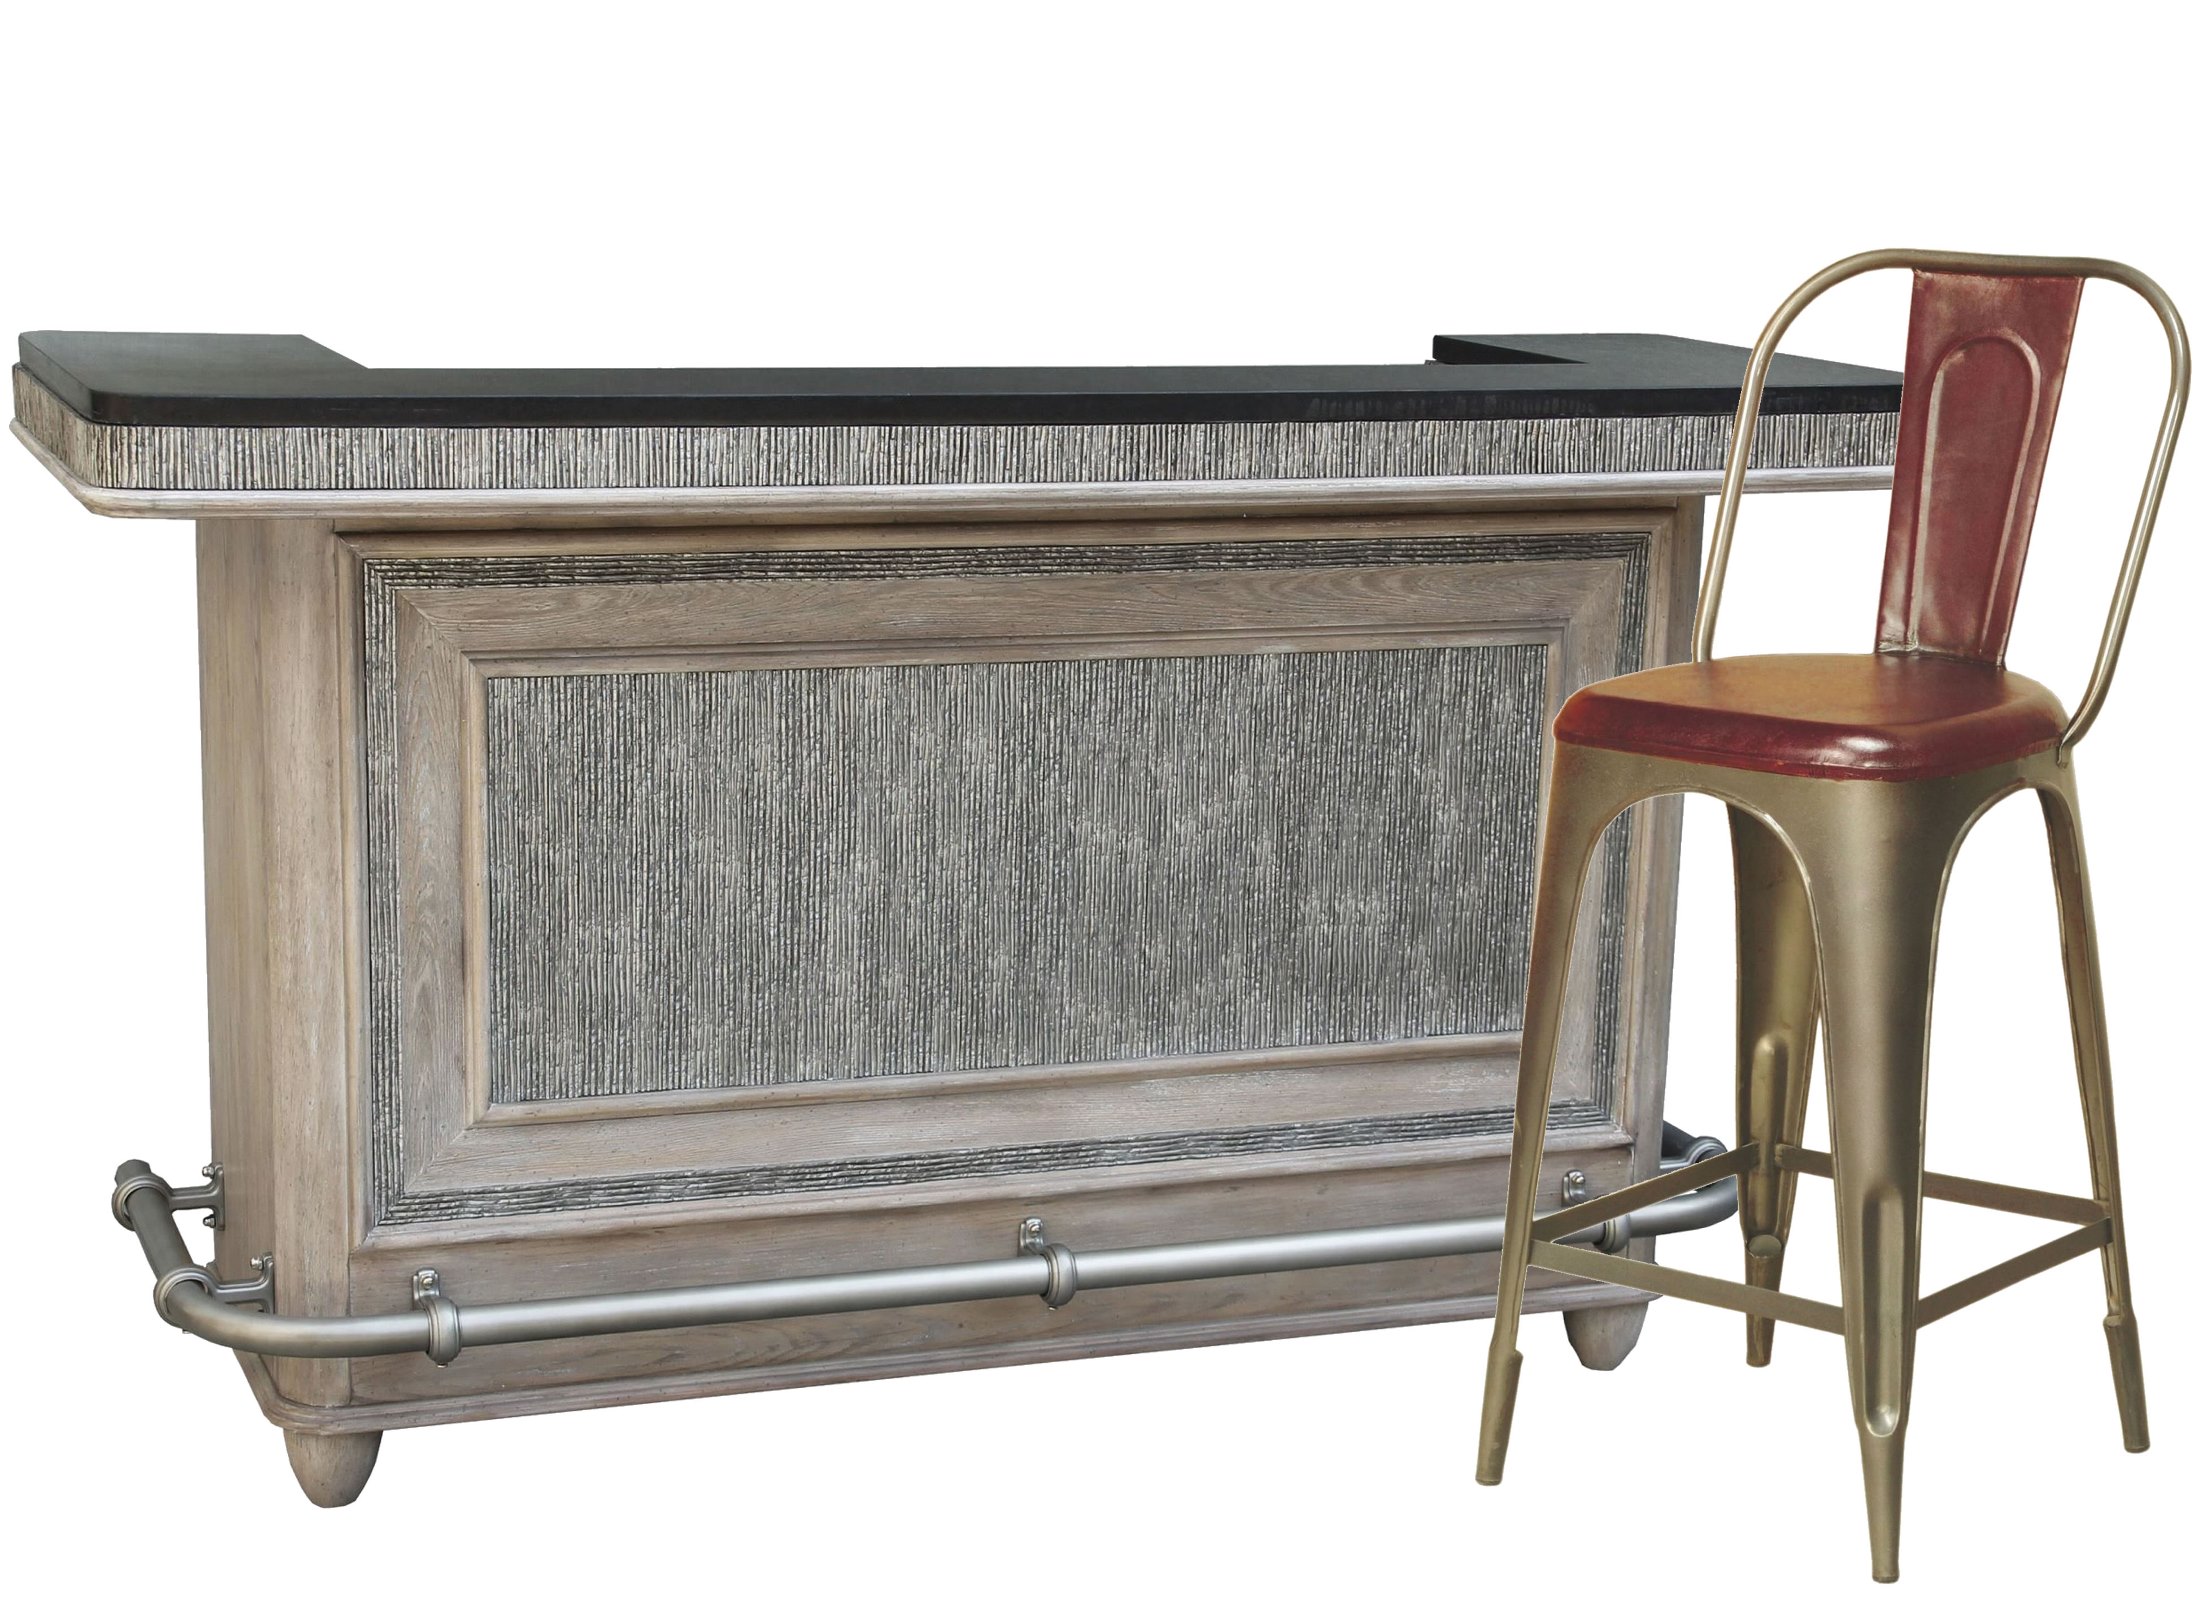 Textured Front Bar Table